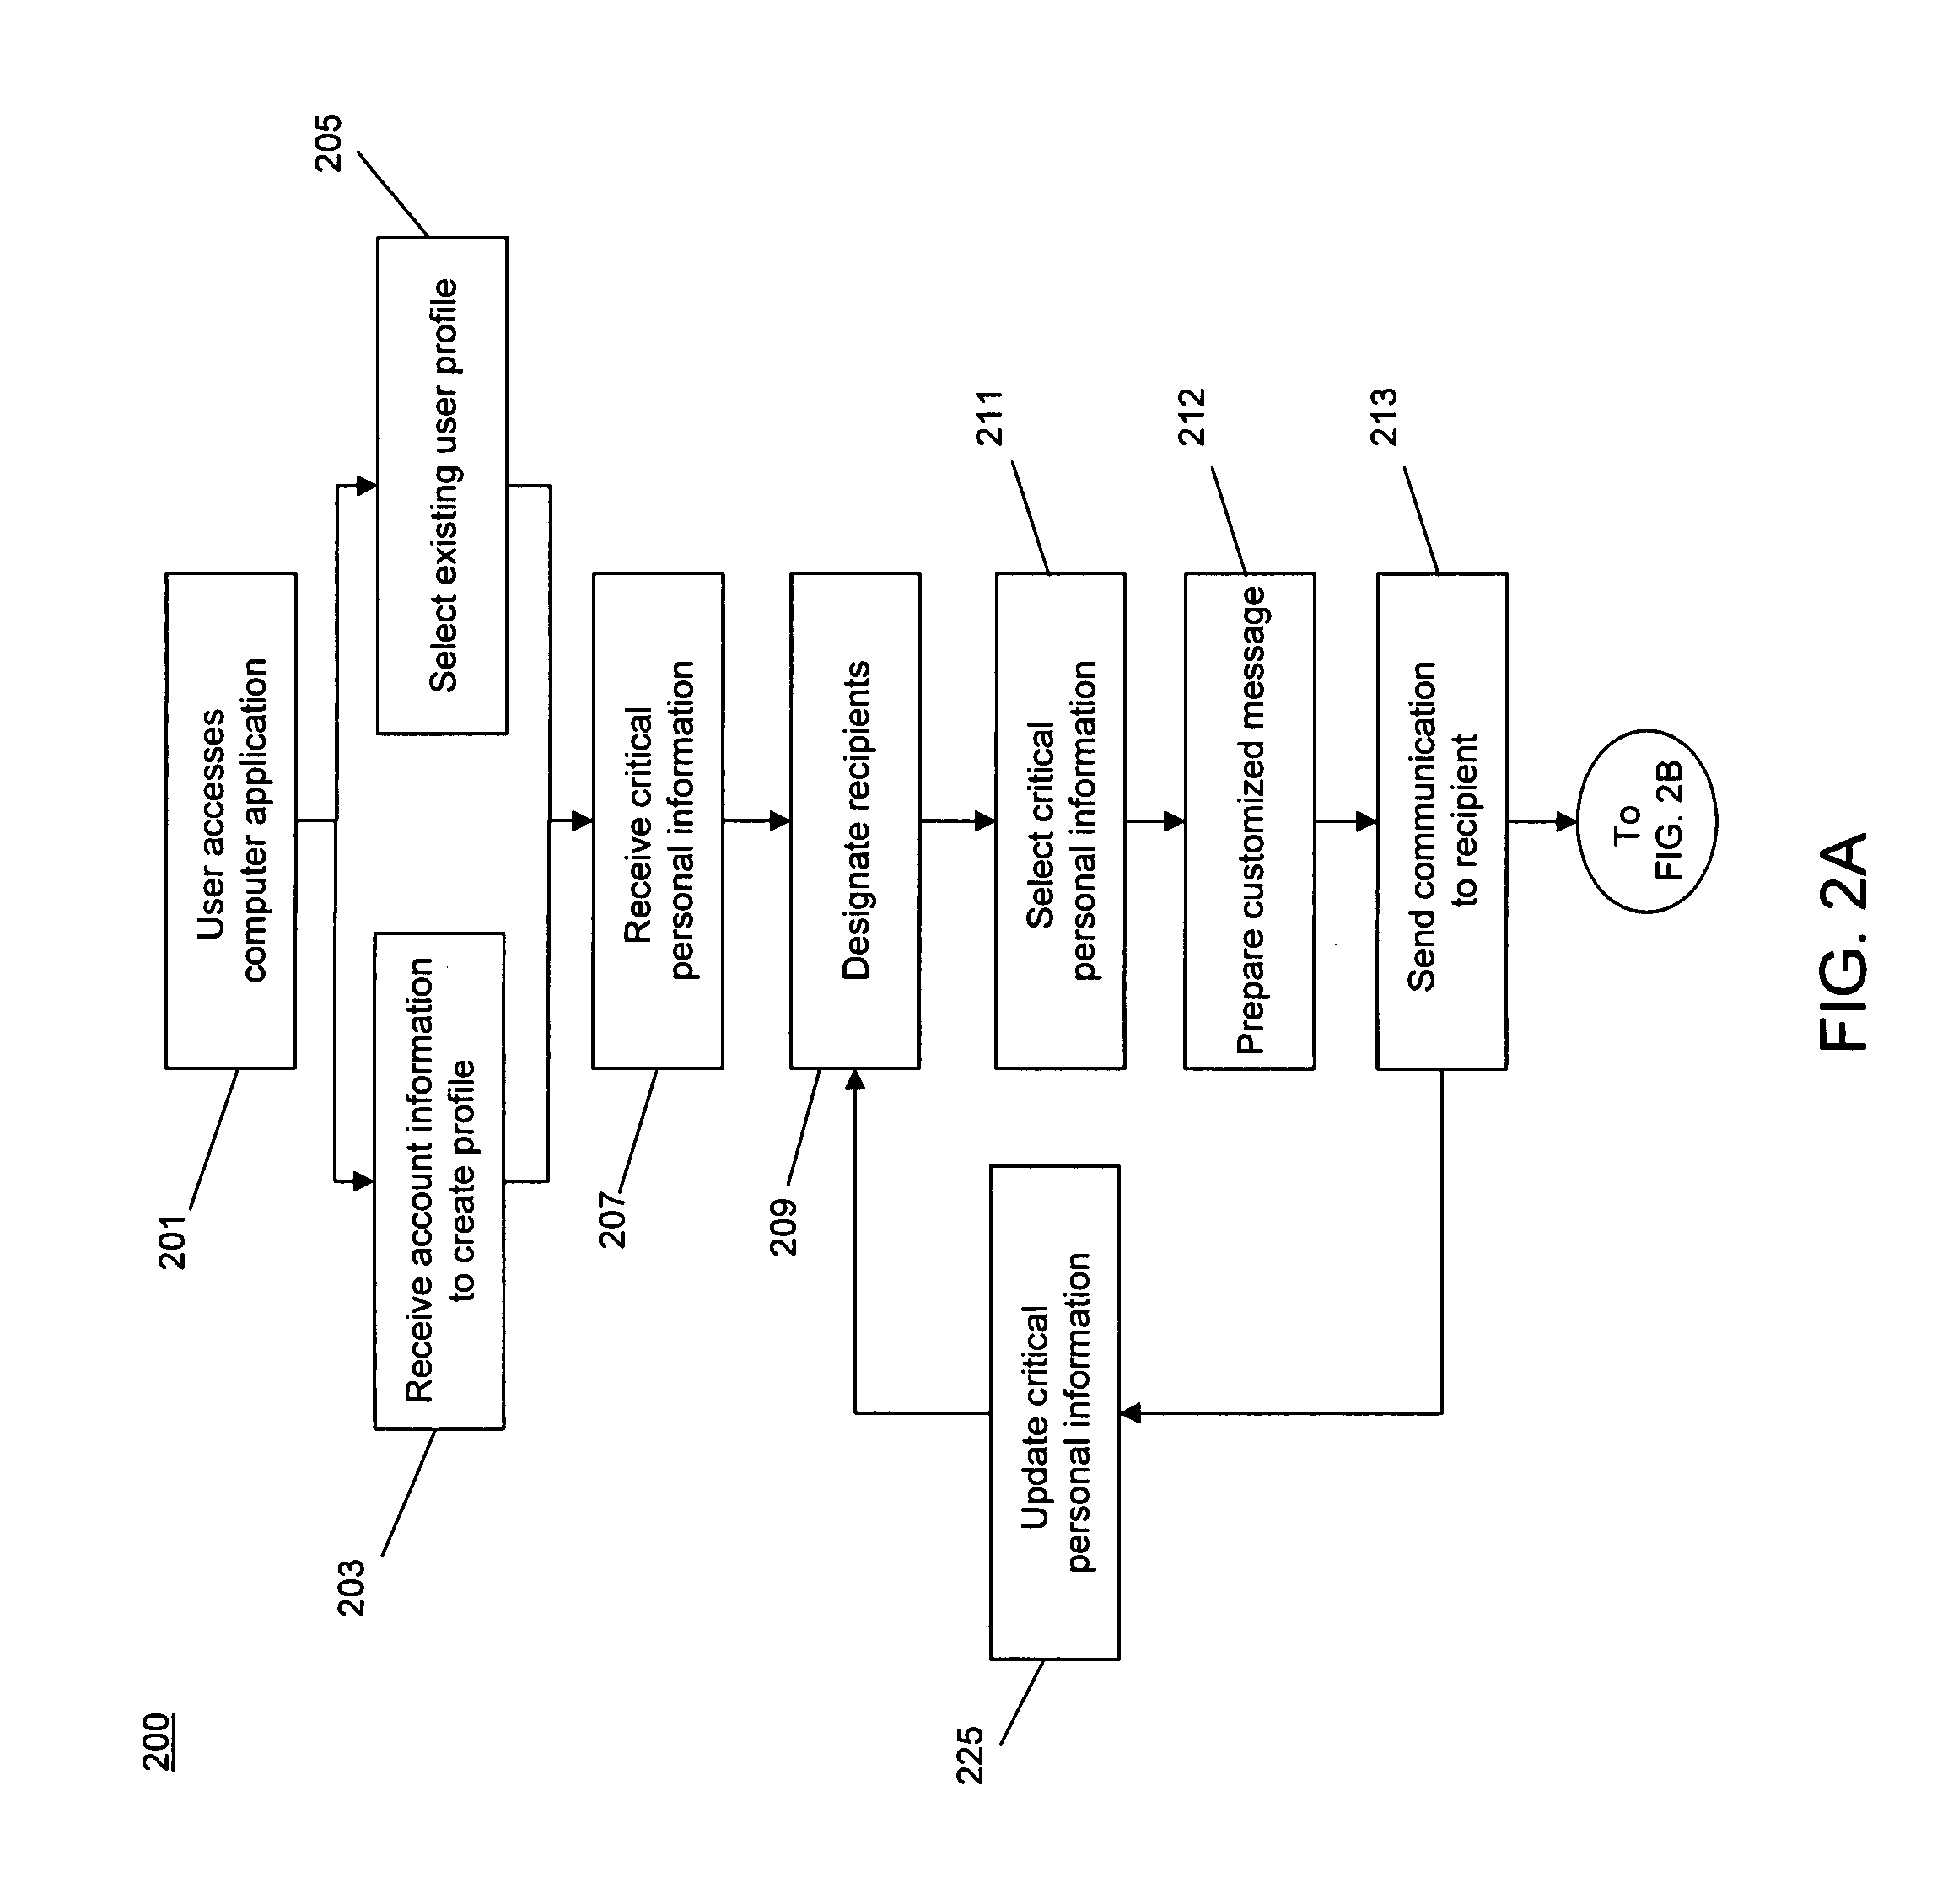 Computer-implemented system and method for aggregating and selectively distributing critical personal information to one or more user-designated recipients